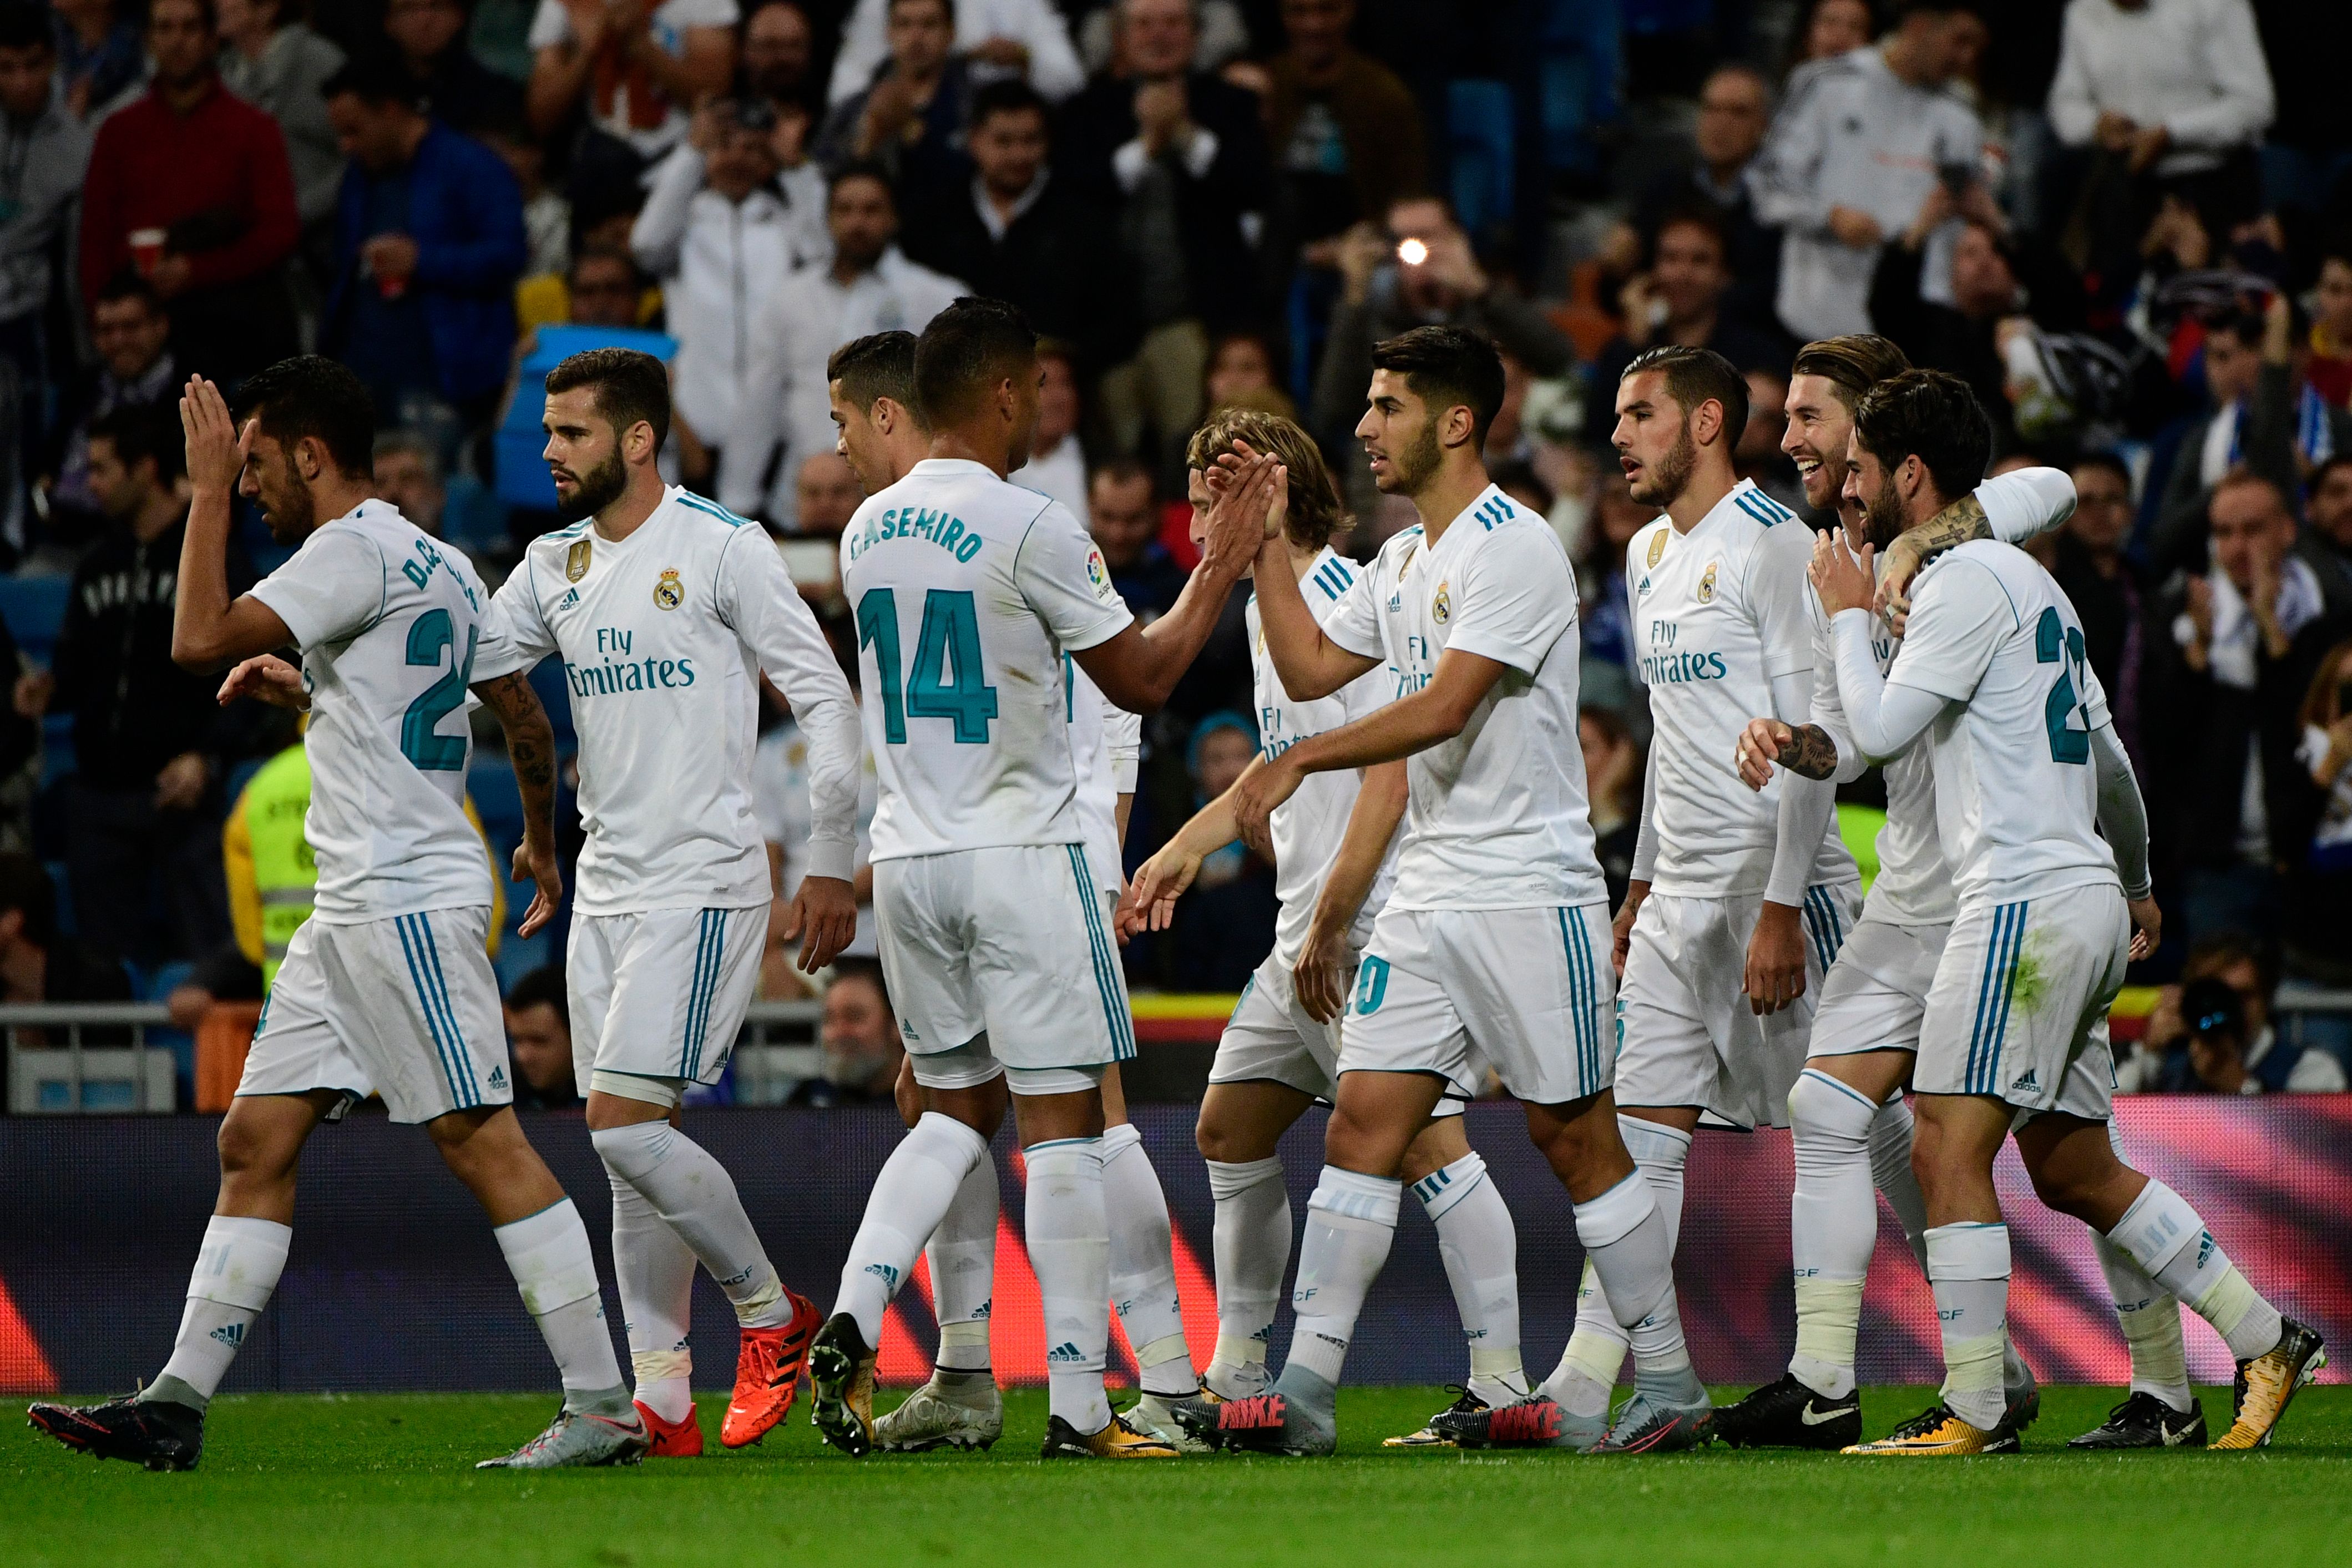 Real Madrid's players celebrate their second goal during the Spanish league football match Real Madrid CF vs SD Eibar at the Santiago Bernabeu stadium in Madrid on October 22, 2017. / AFP PHOTO / PIERRE-PHILIPPE MARCOU        (Photo credit should read PIERRE-PHILIPPE MARCOU/AFP/Getty Images)